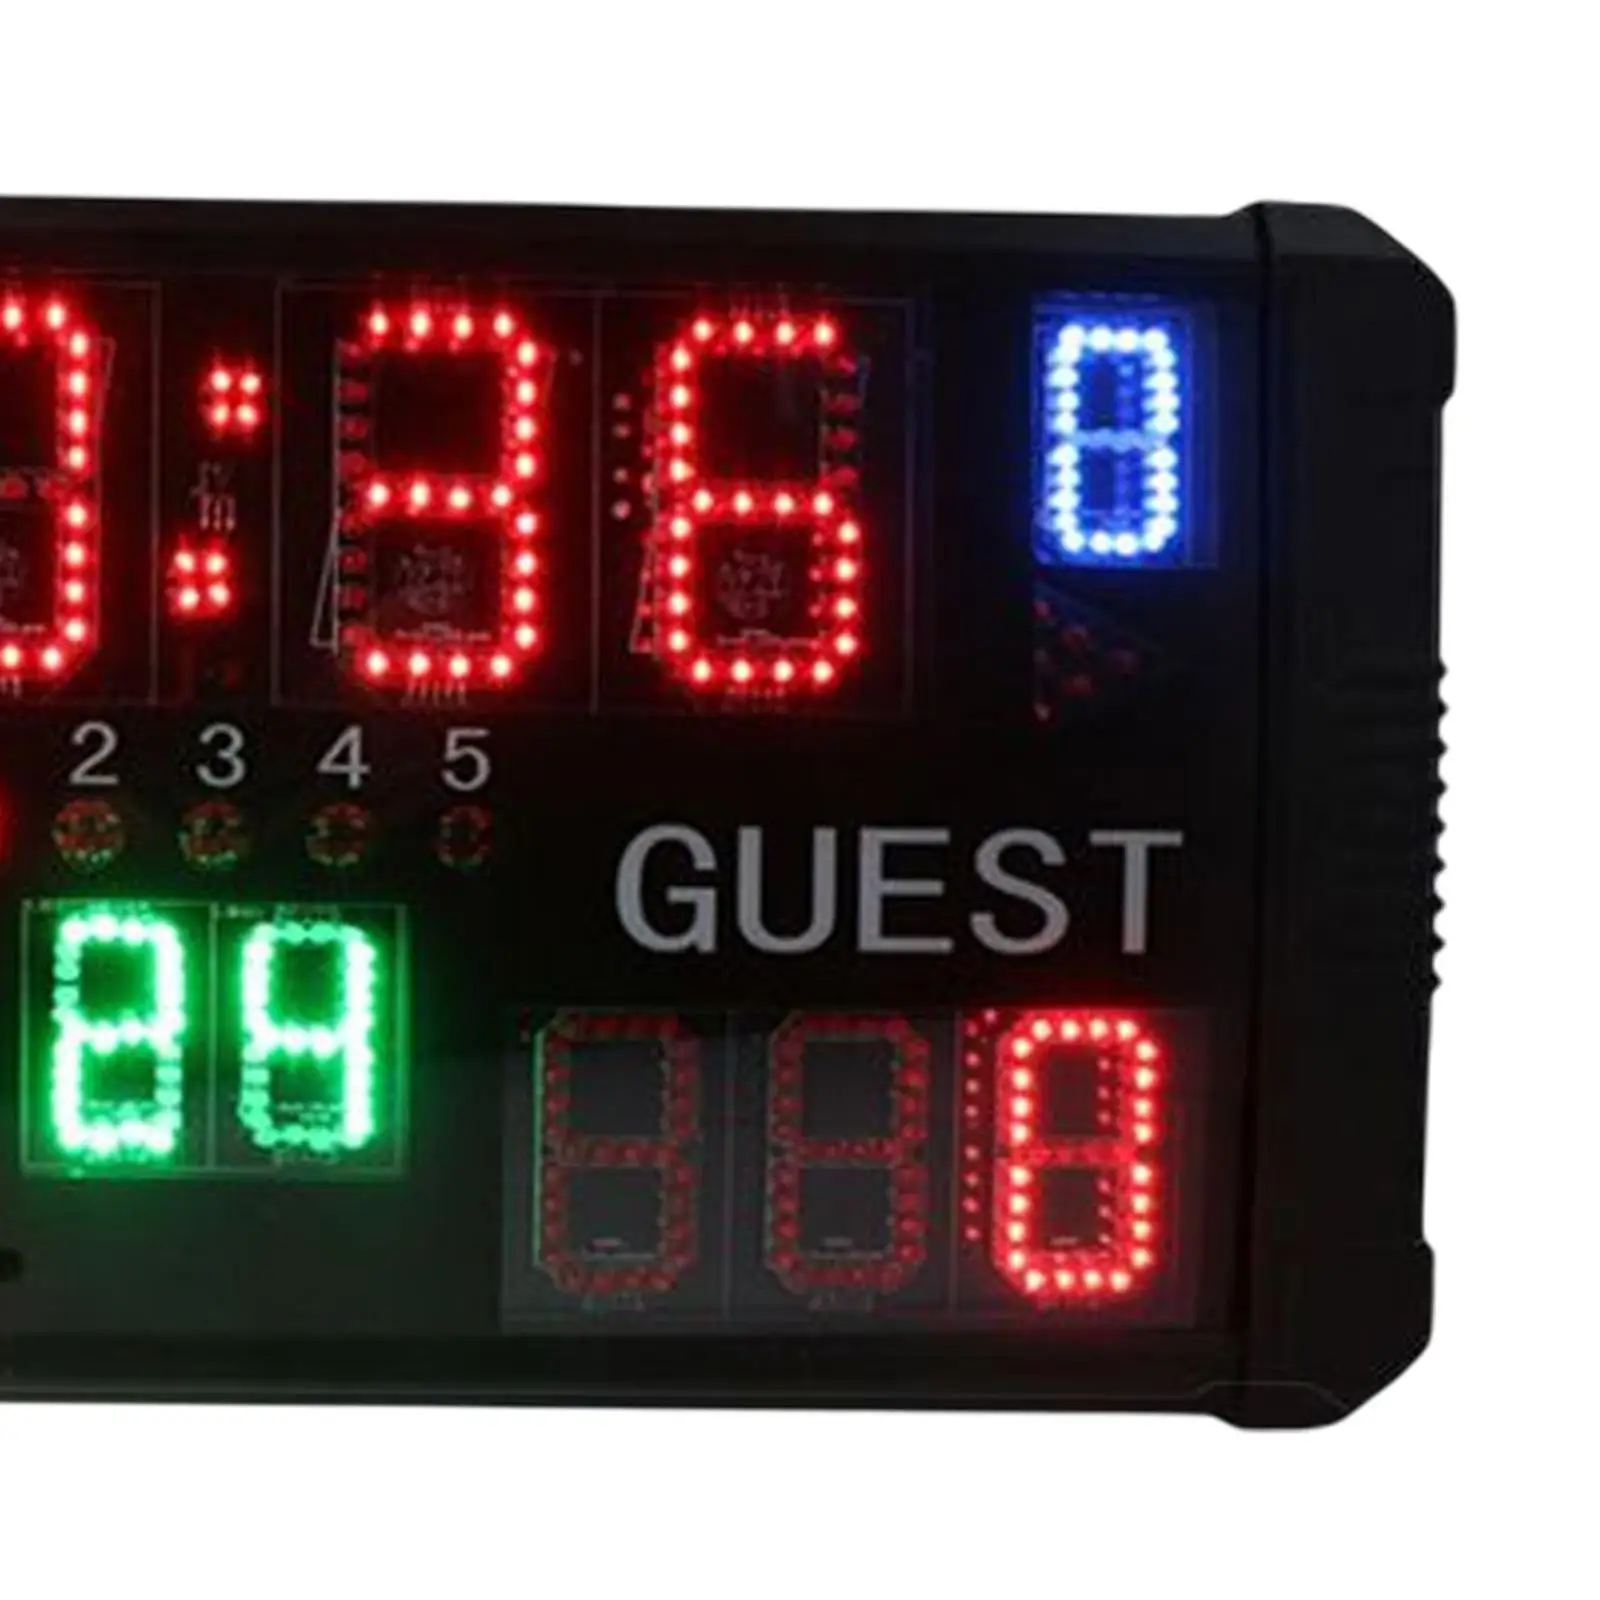 Portable Indoor Basketball Scoreboard Score Counting Timer Counter Electronic Digital Scoreboard Score Keeper for Games Sports